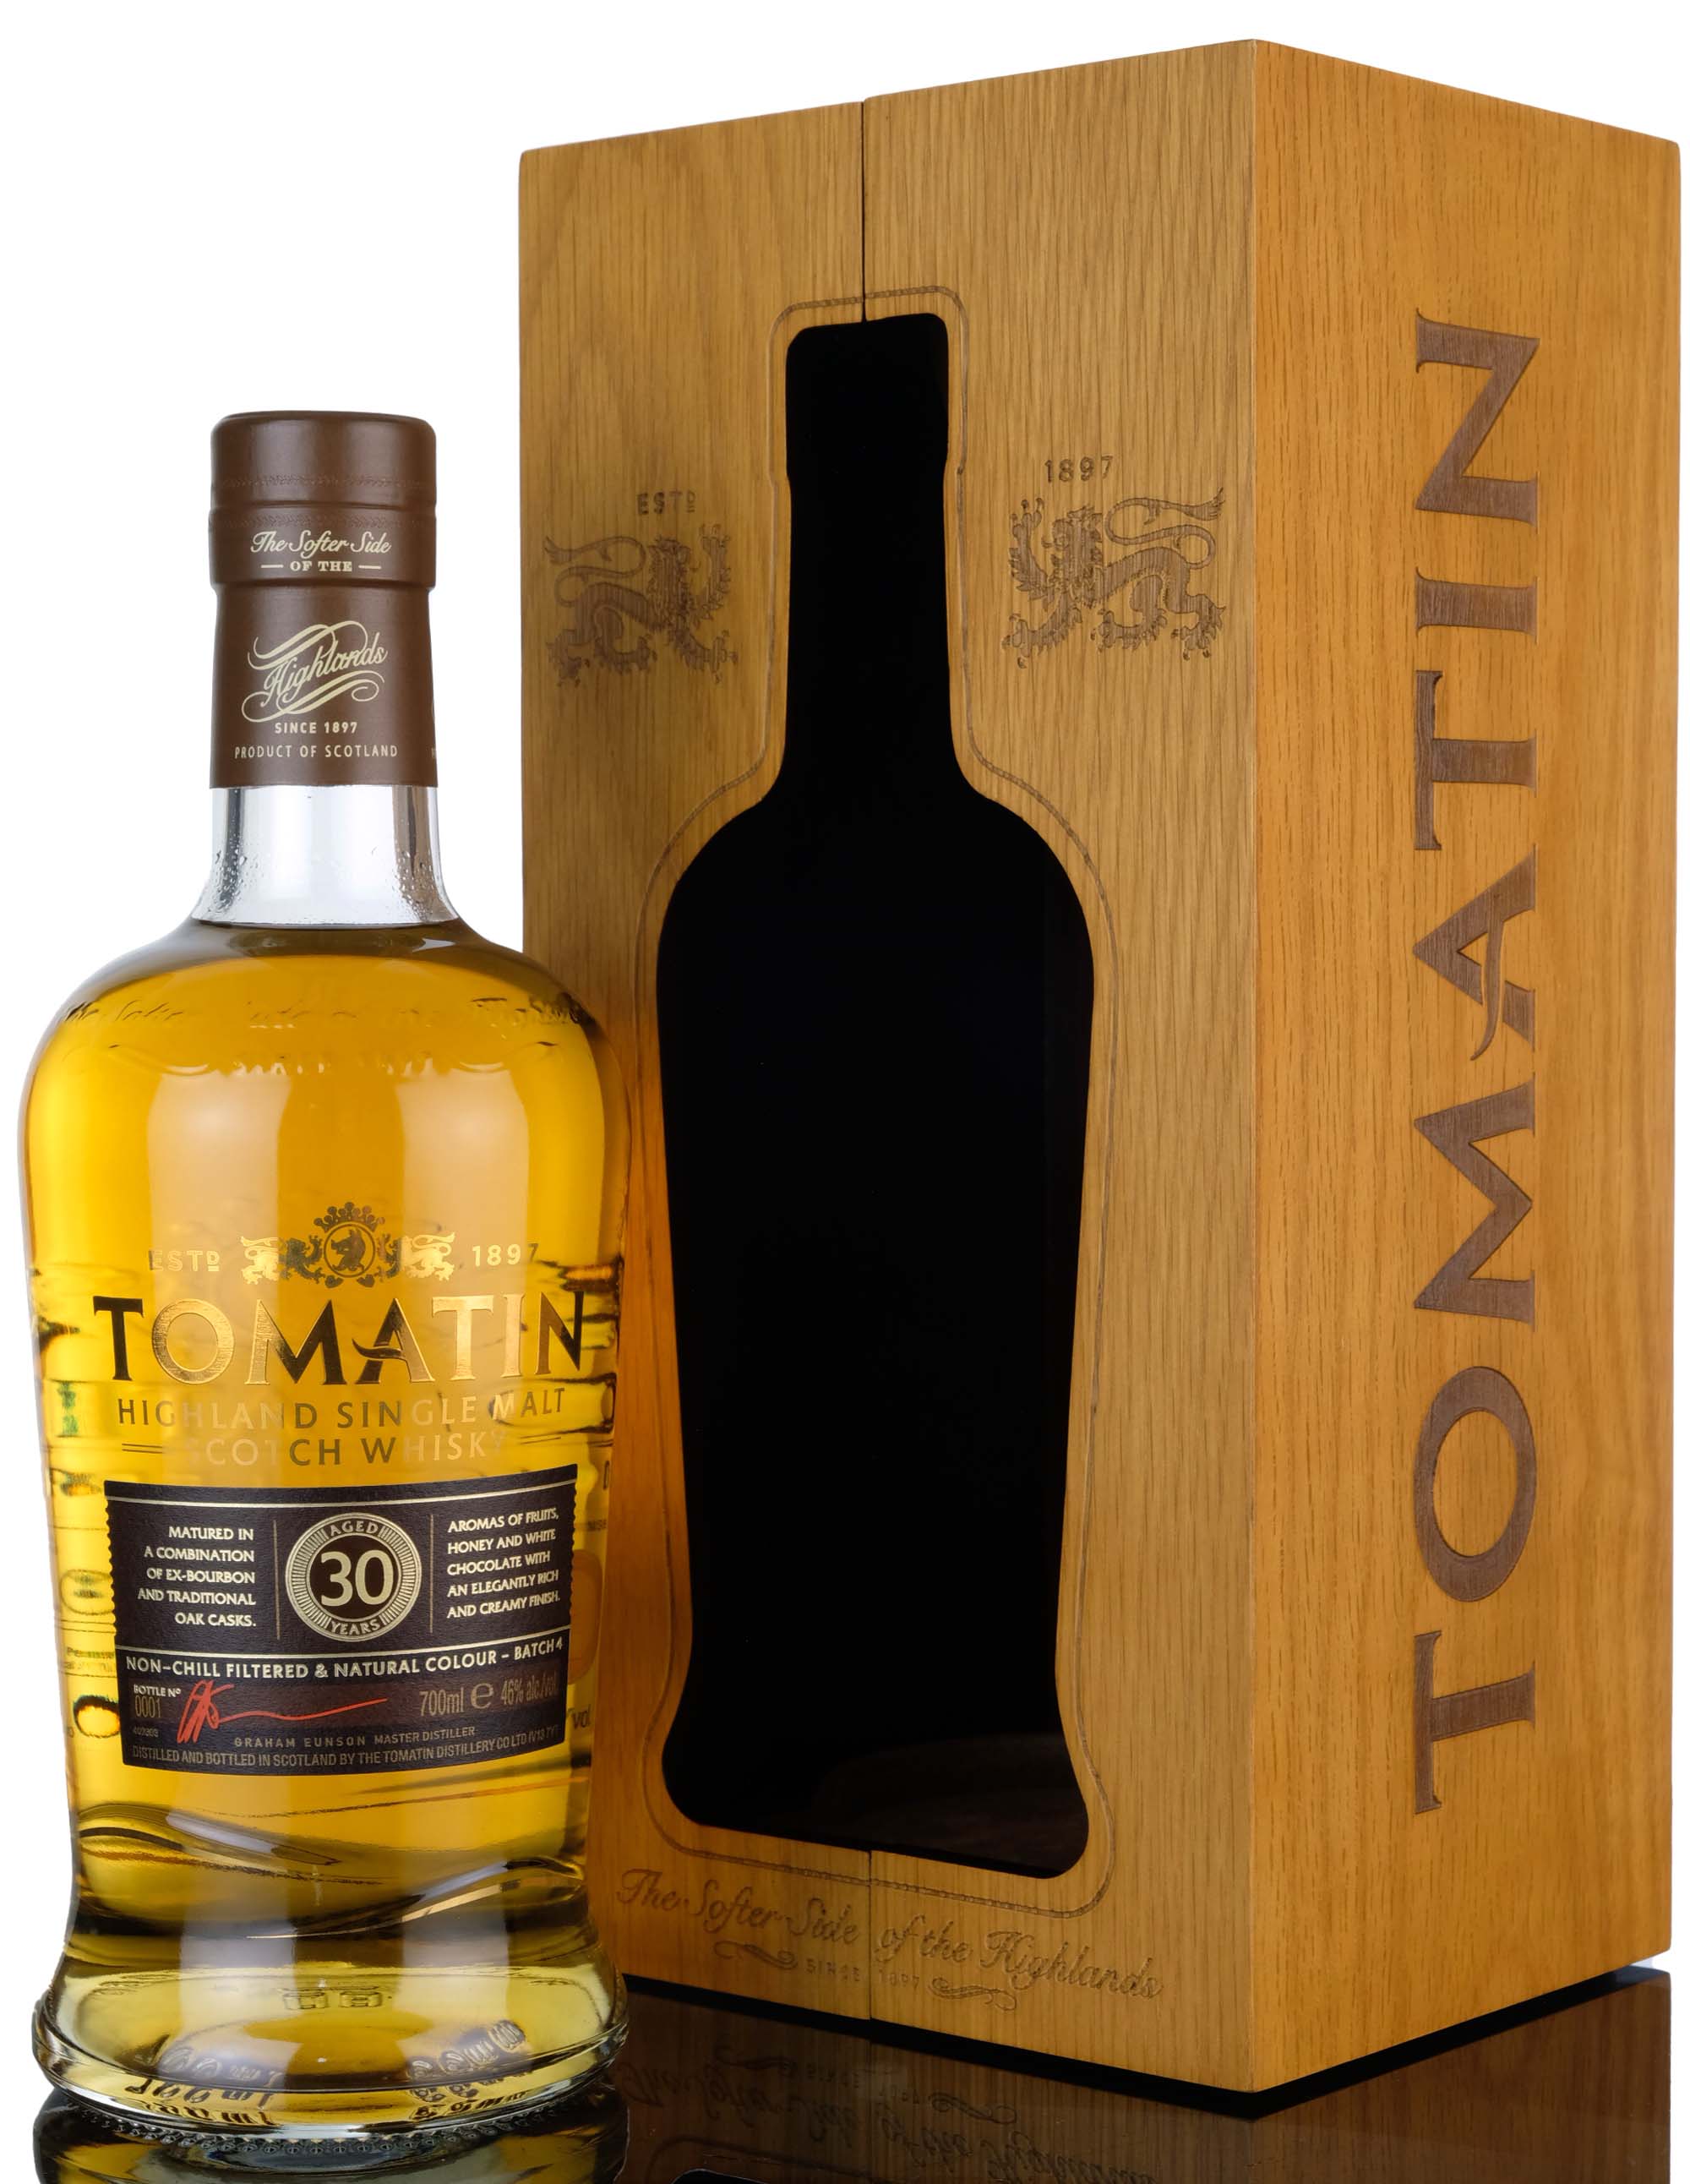 Tomatin 30 Year Old - Batch 4 - 2021 Release - Bottle number 1